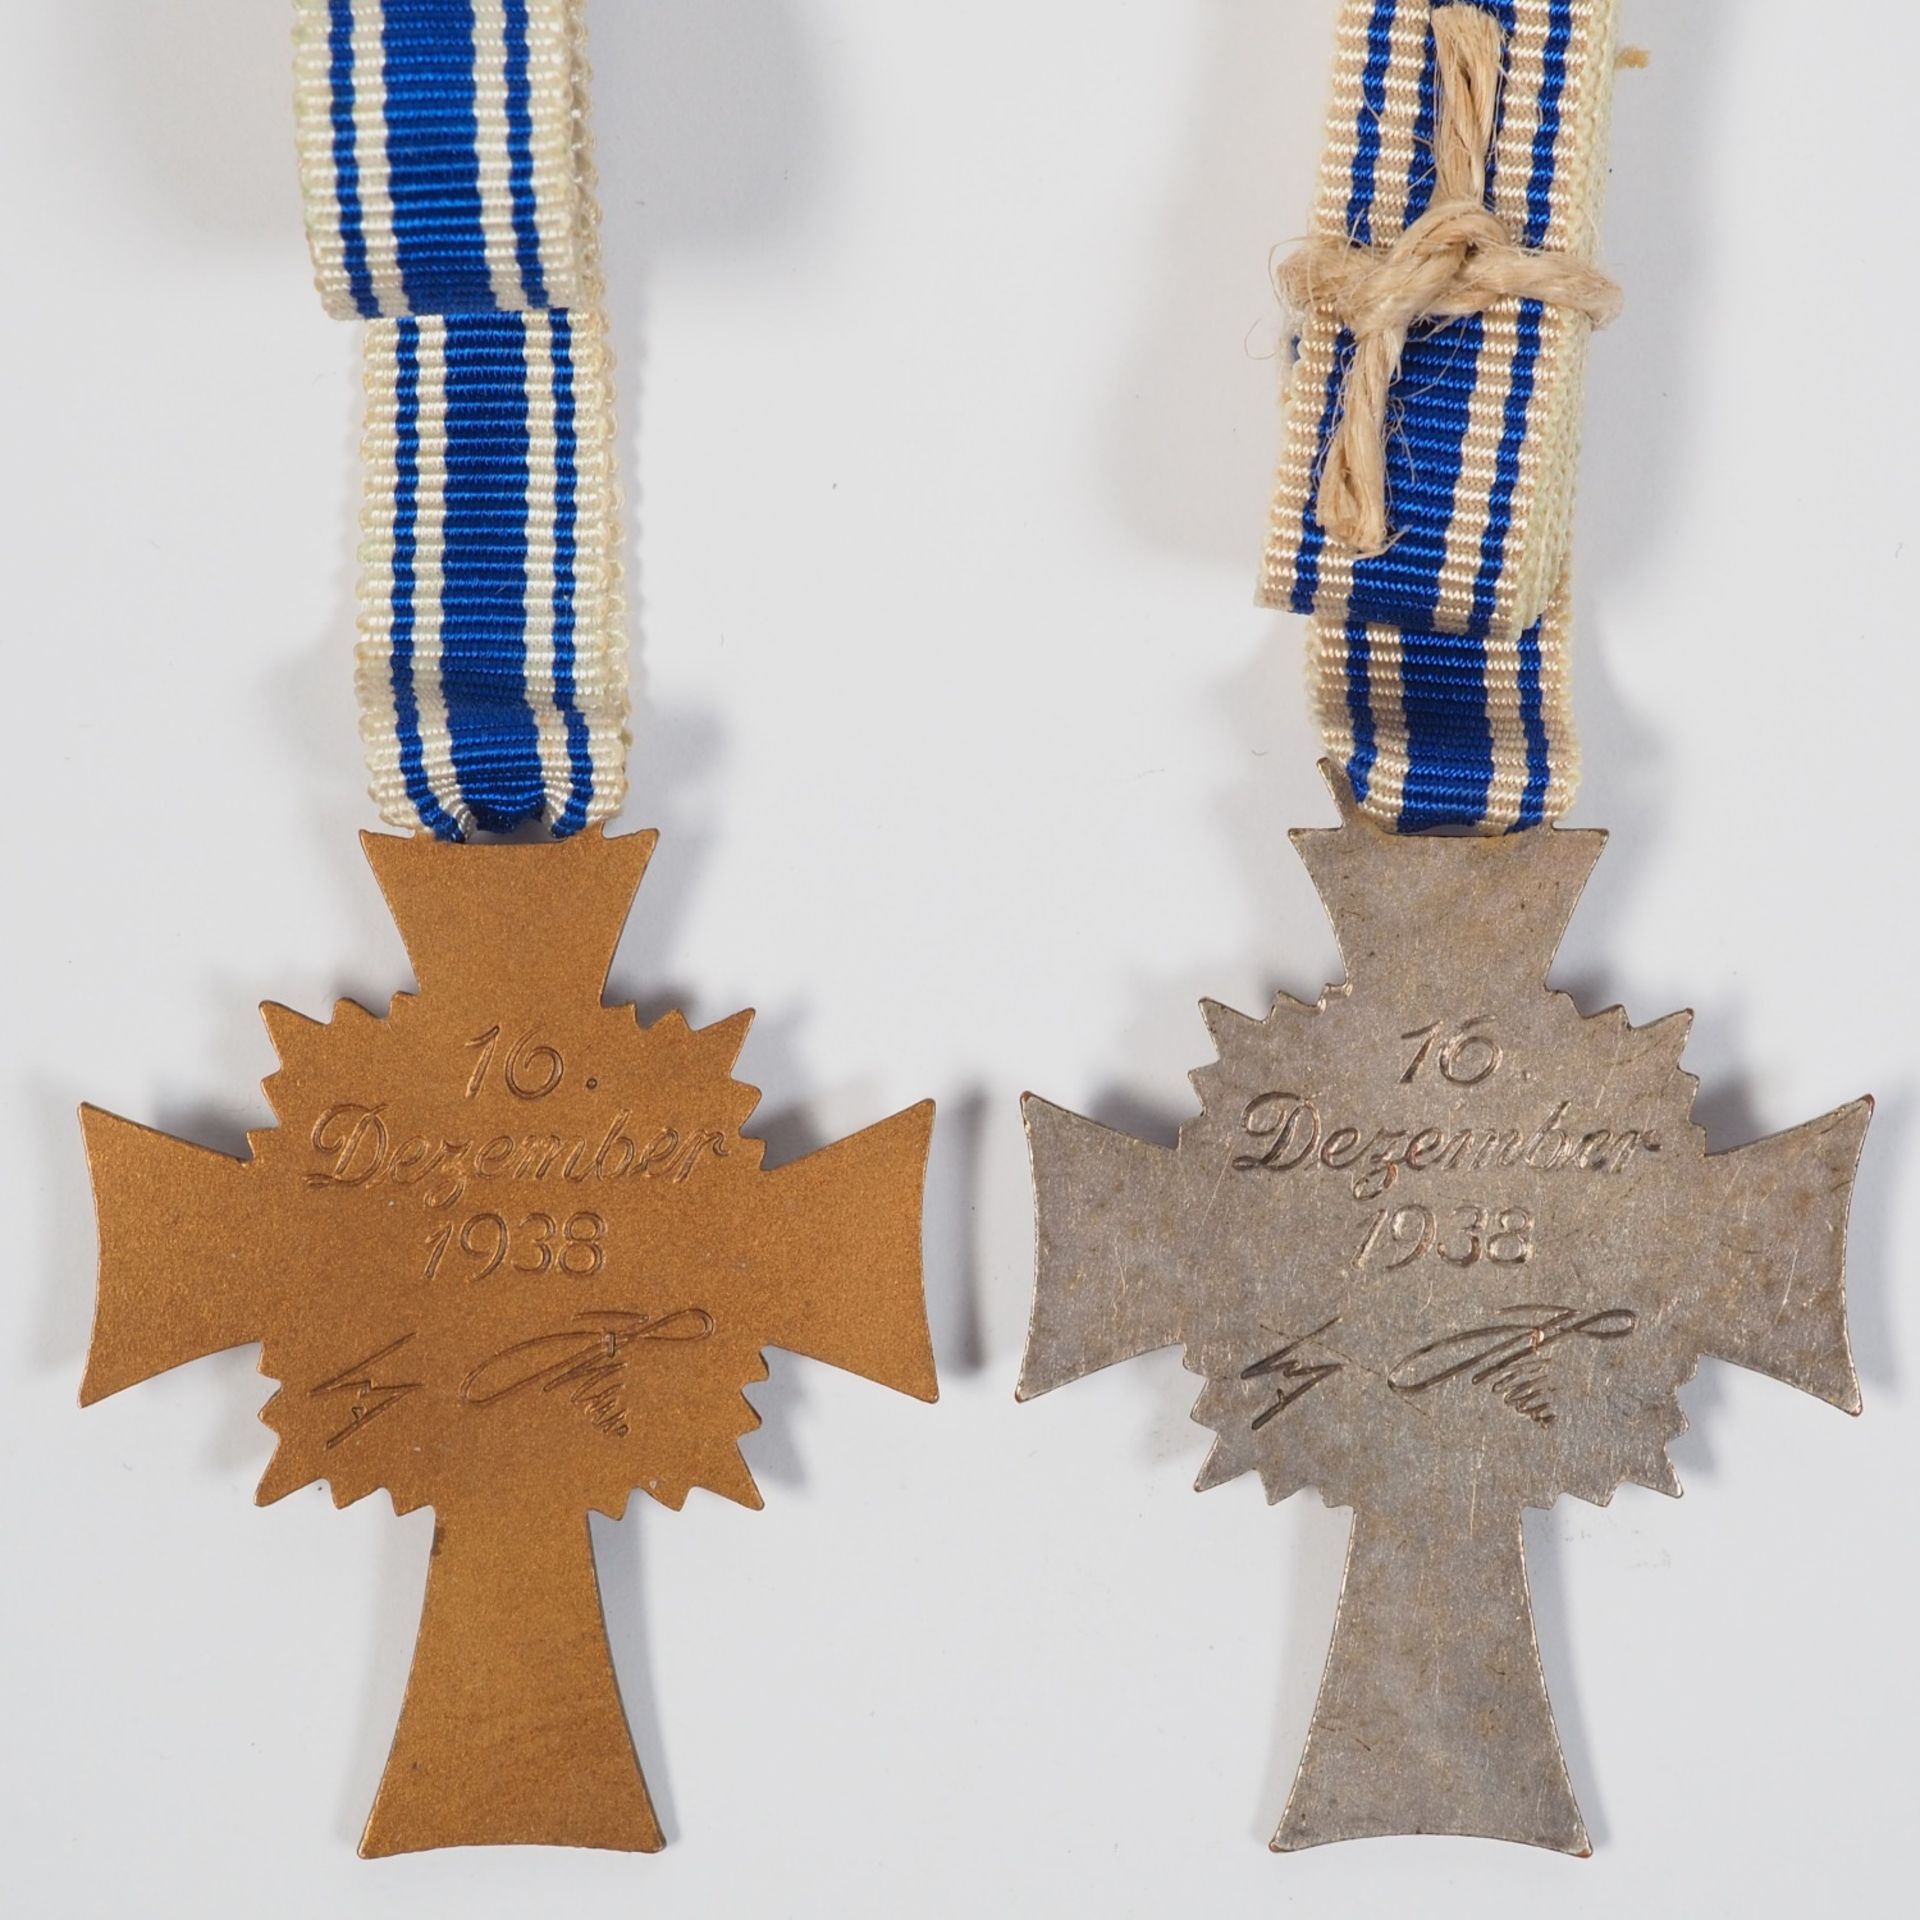 2x Cross of Honor of the German Mother - Mother's Cross in bronze and silver - Image 2 of 2